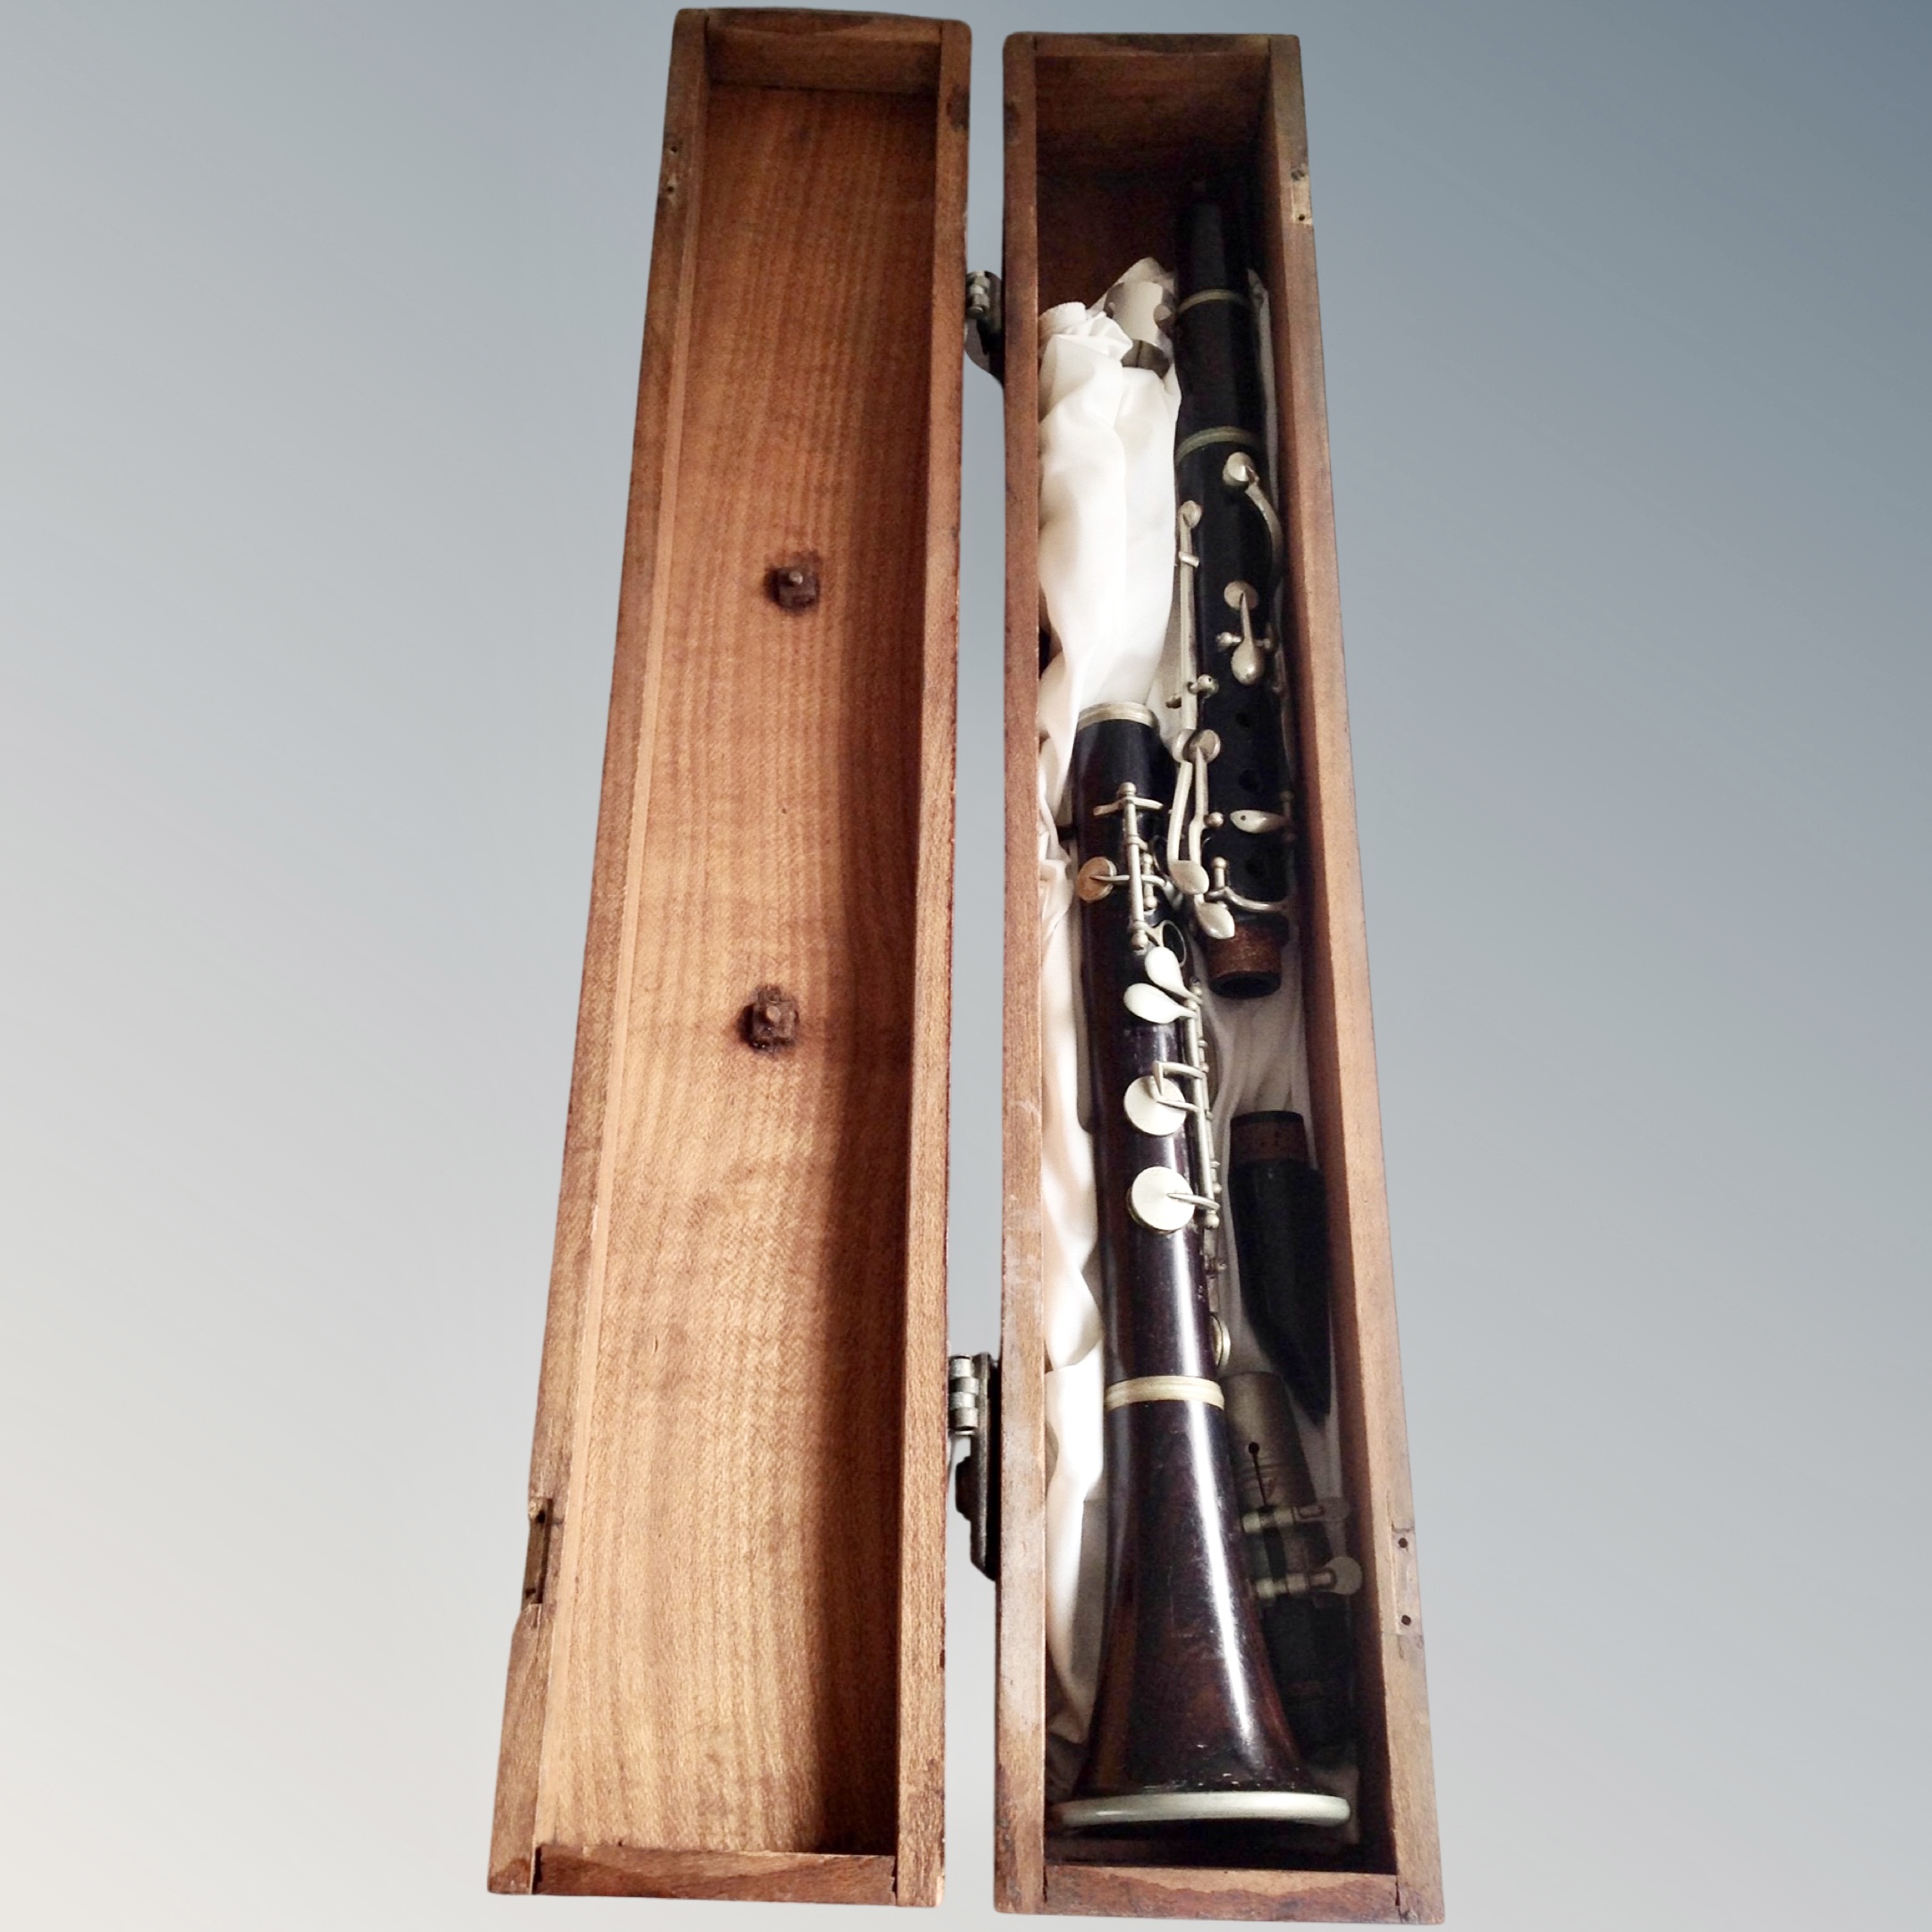 A vintage wooden clarinet by JTL of Paris, in wooden box.